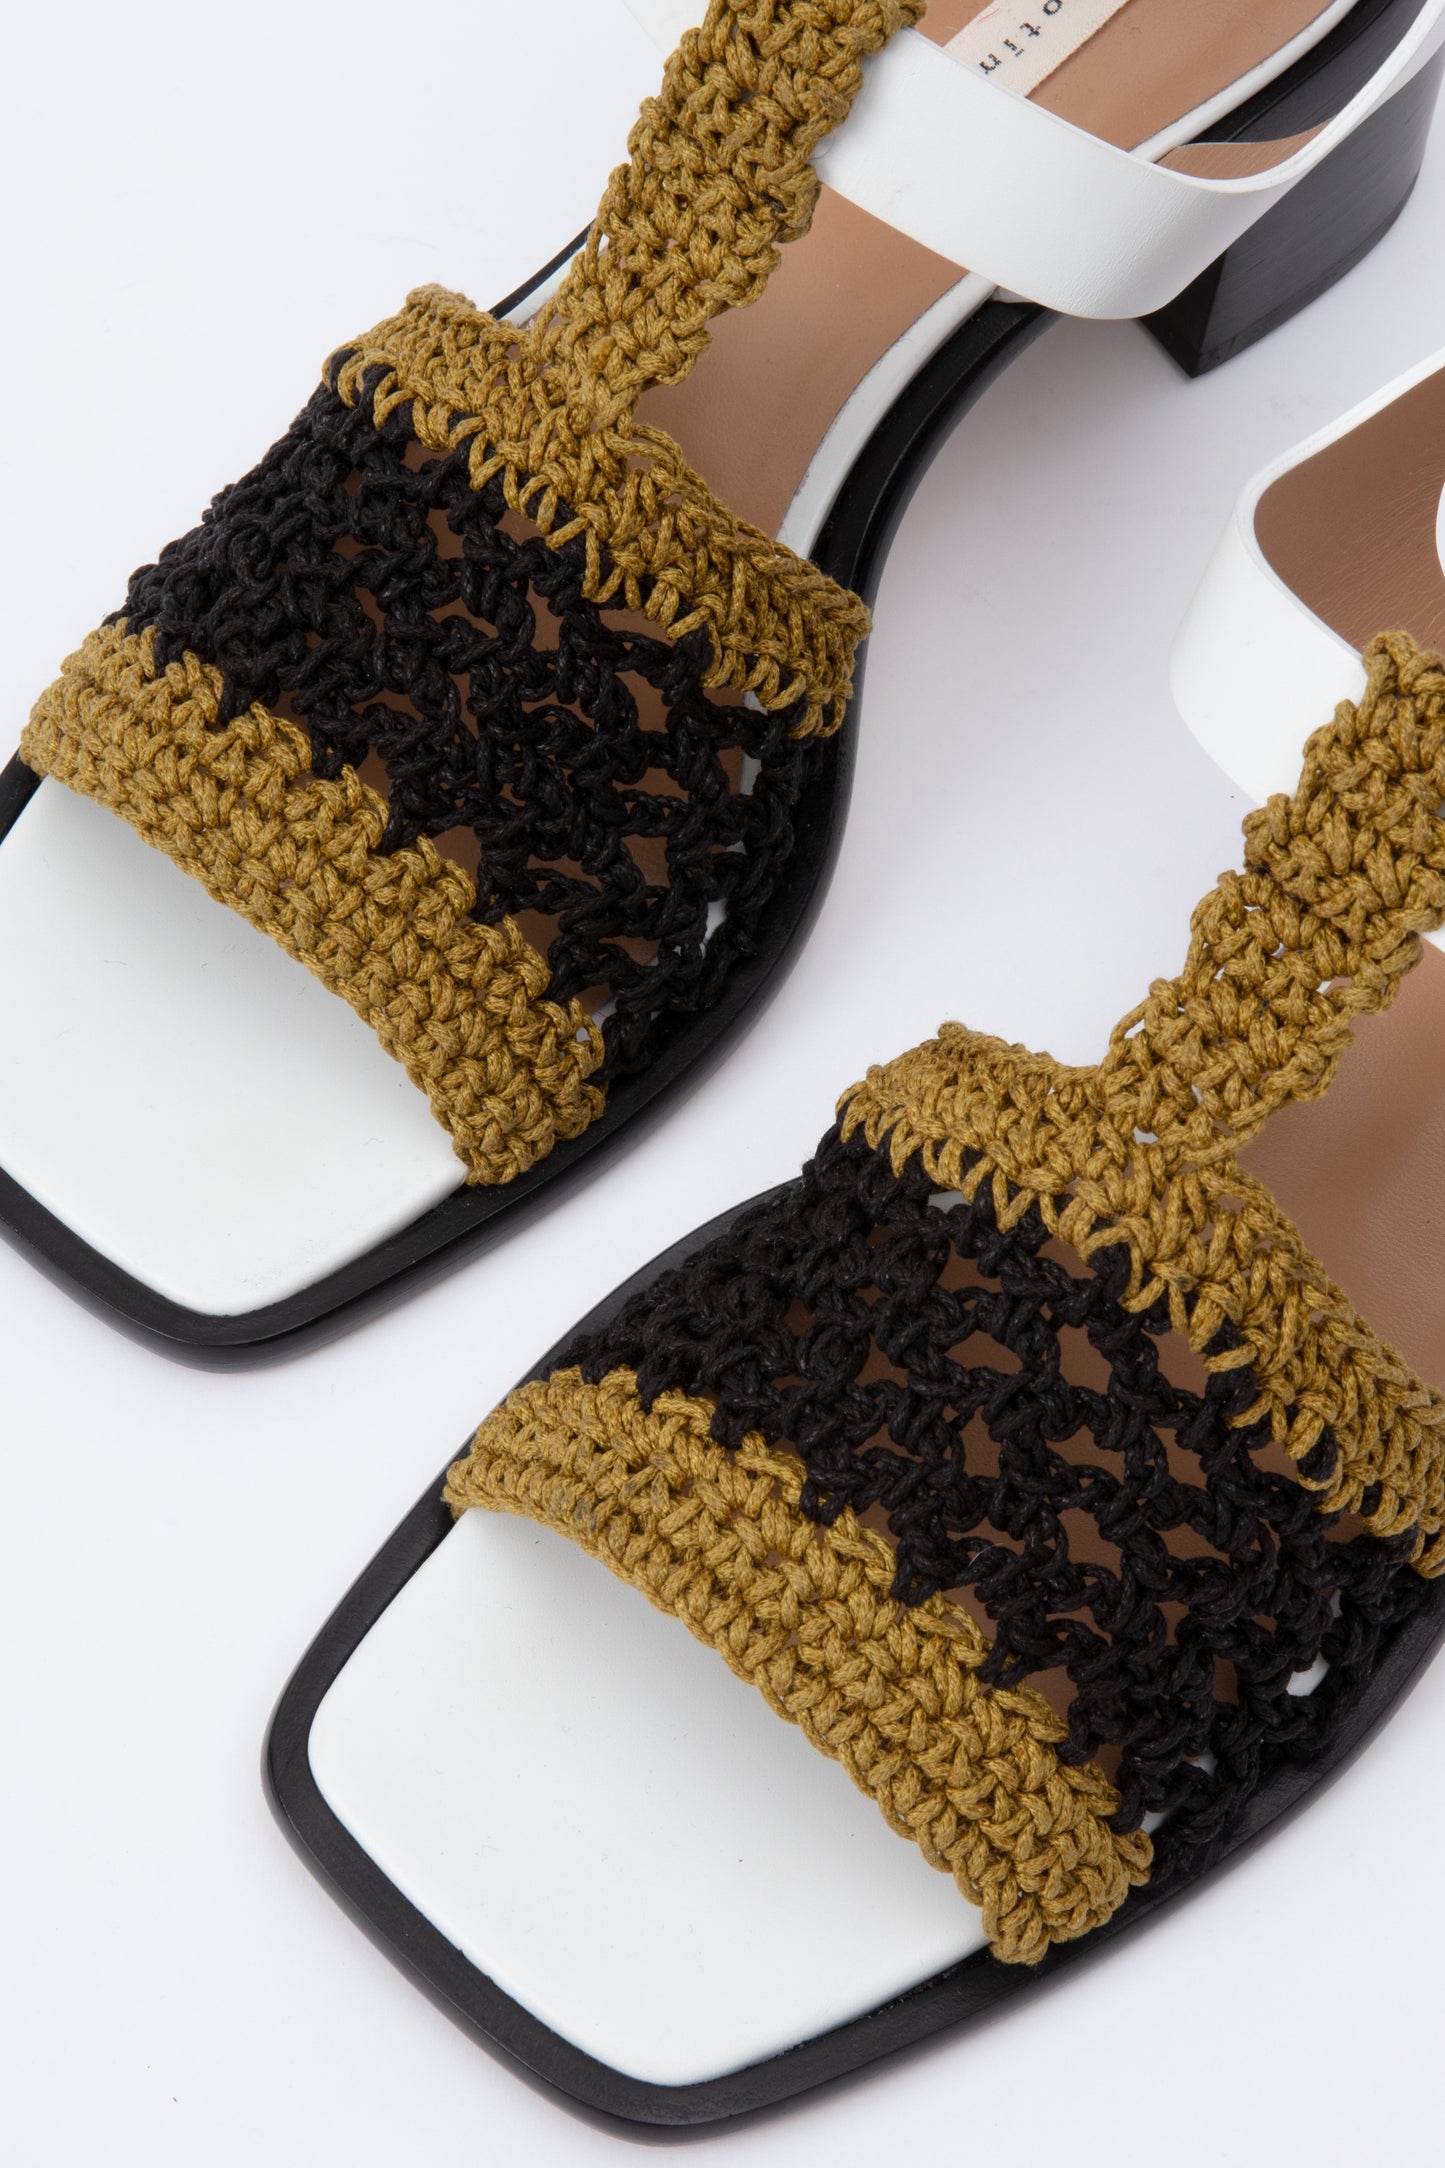 Open toe sandals with black leather base and white leather ankle straps. The block heel is slightly rounded and thick. Connected to the ankle strap is a toe strap made from hand-knit crochet in a cumin yellow and black. 